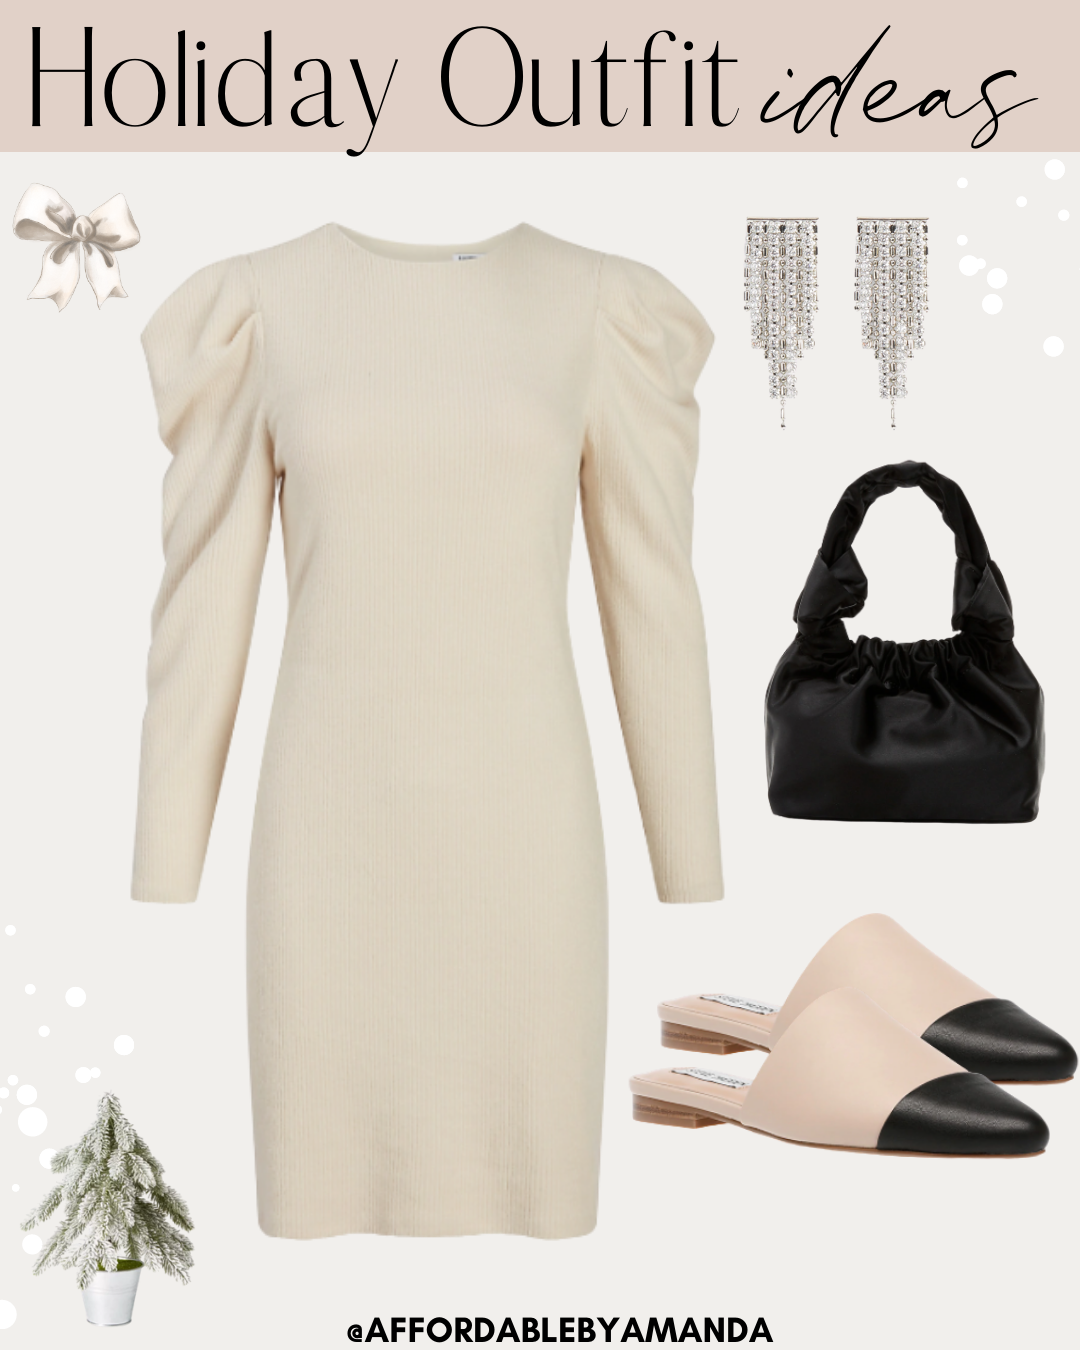 Holiday Outfit - Sweater Dress - Express - Affordable by Amanda